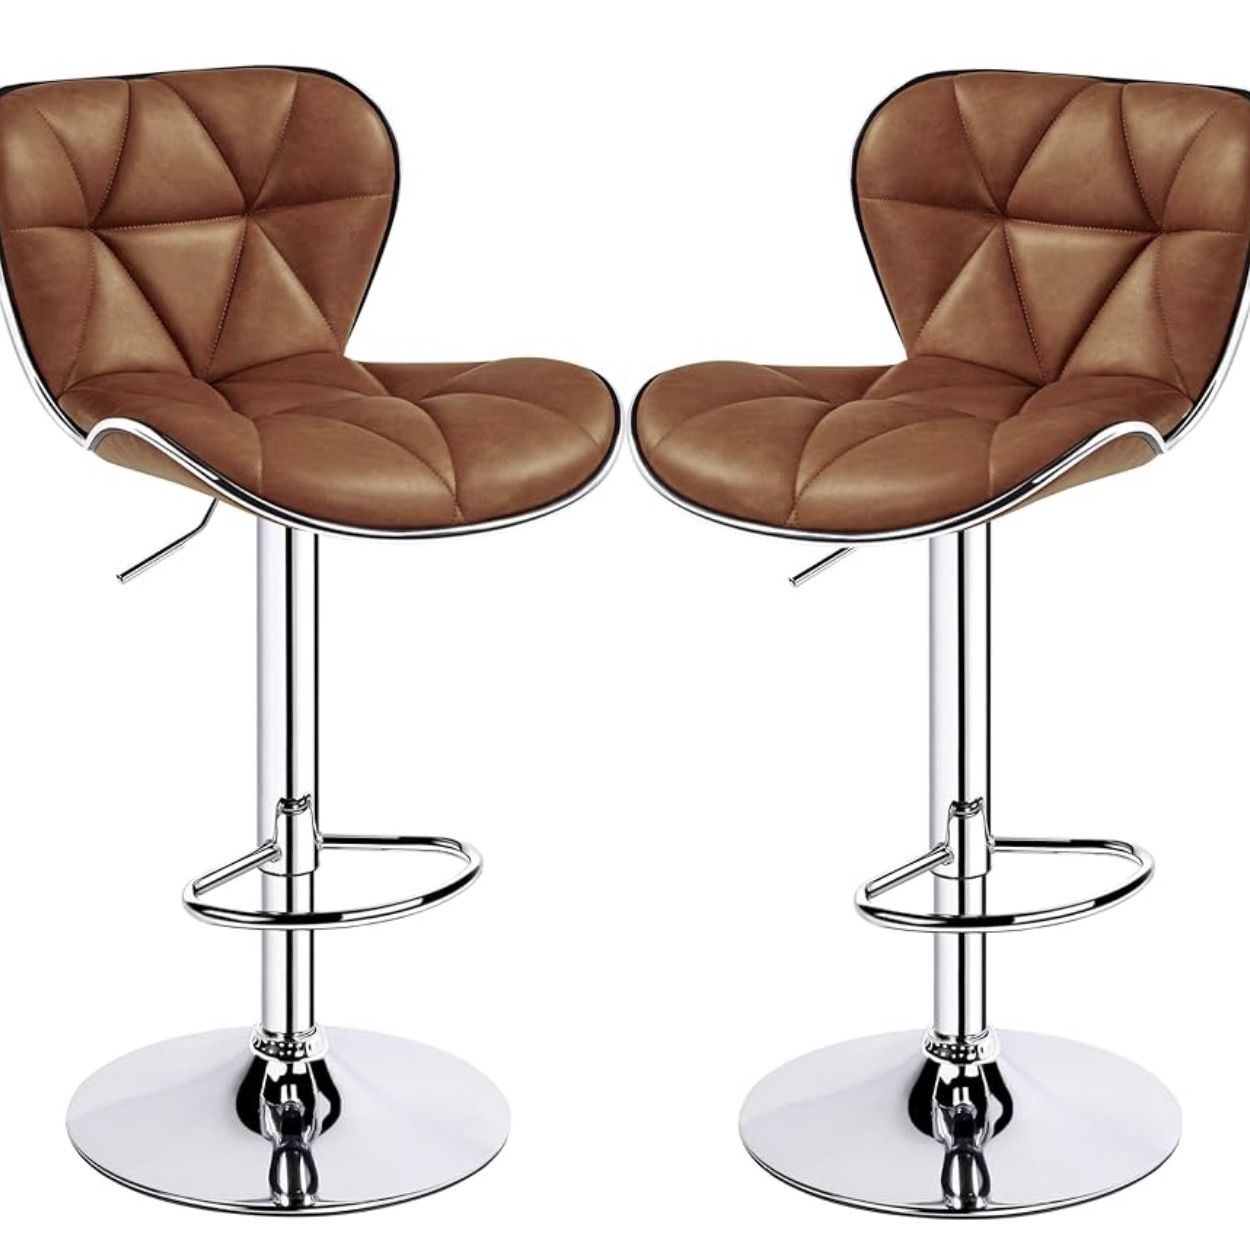 bar stools Set of 2 Adjustable Bar Stools PU Leather Swivel Bar Stools with Shell Back Black Pub Chairs Counter Height for Home Kitchen, Retro Brown 6